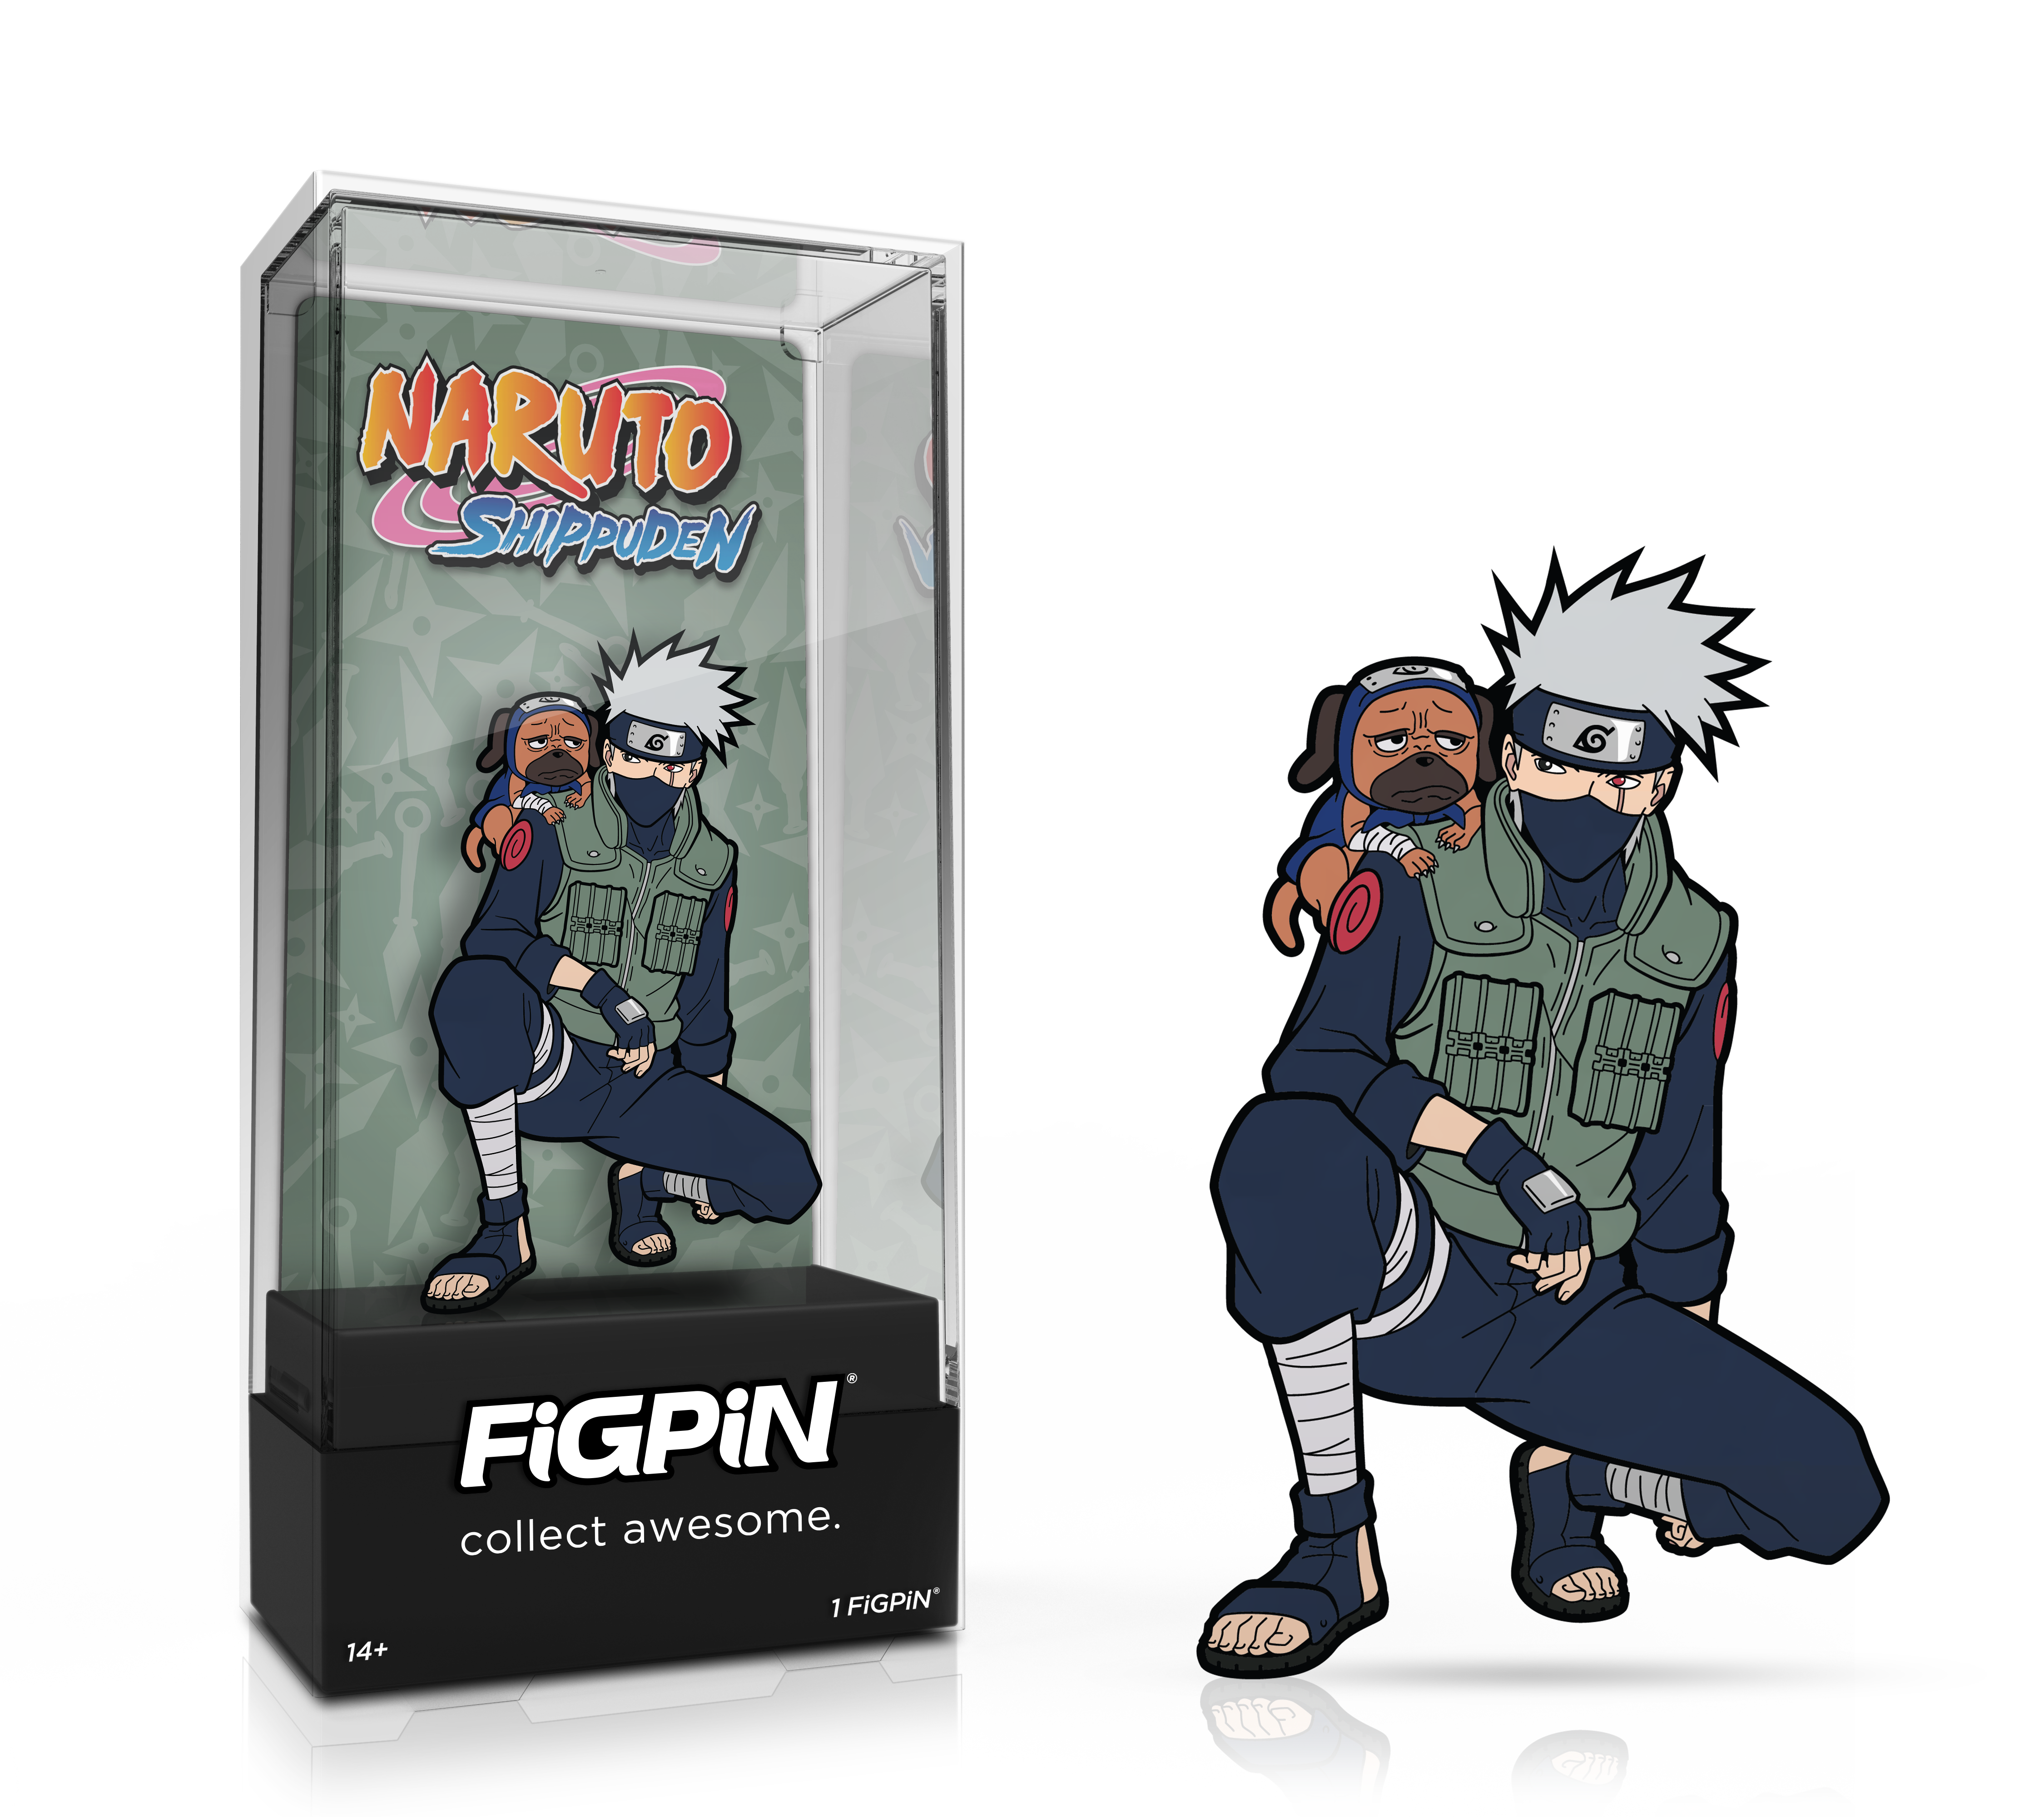 Side by side view of Naruto Shippuden's Kakashi enamel pin in display case and the art render.